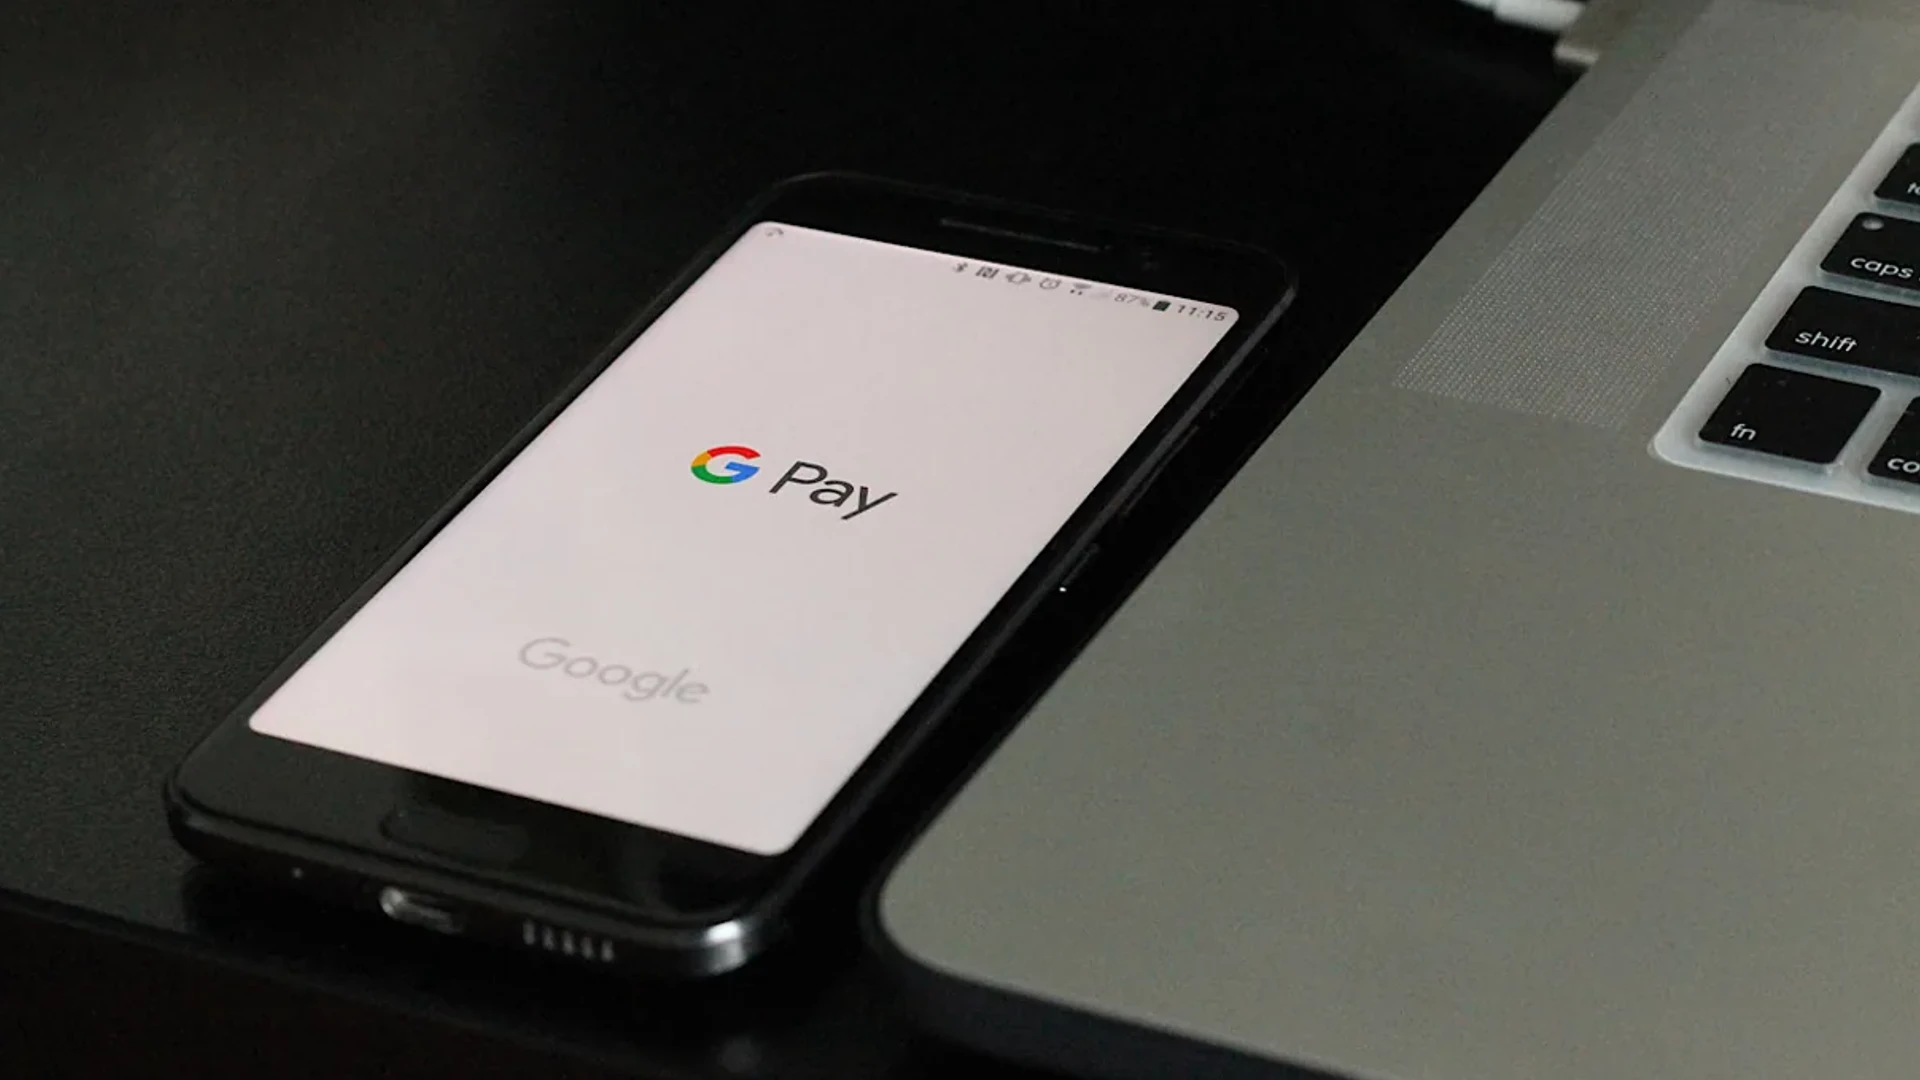 Google has Hired Arnold Goldberg, a Former PayPal Executive, to Head its Value Operations.